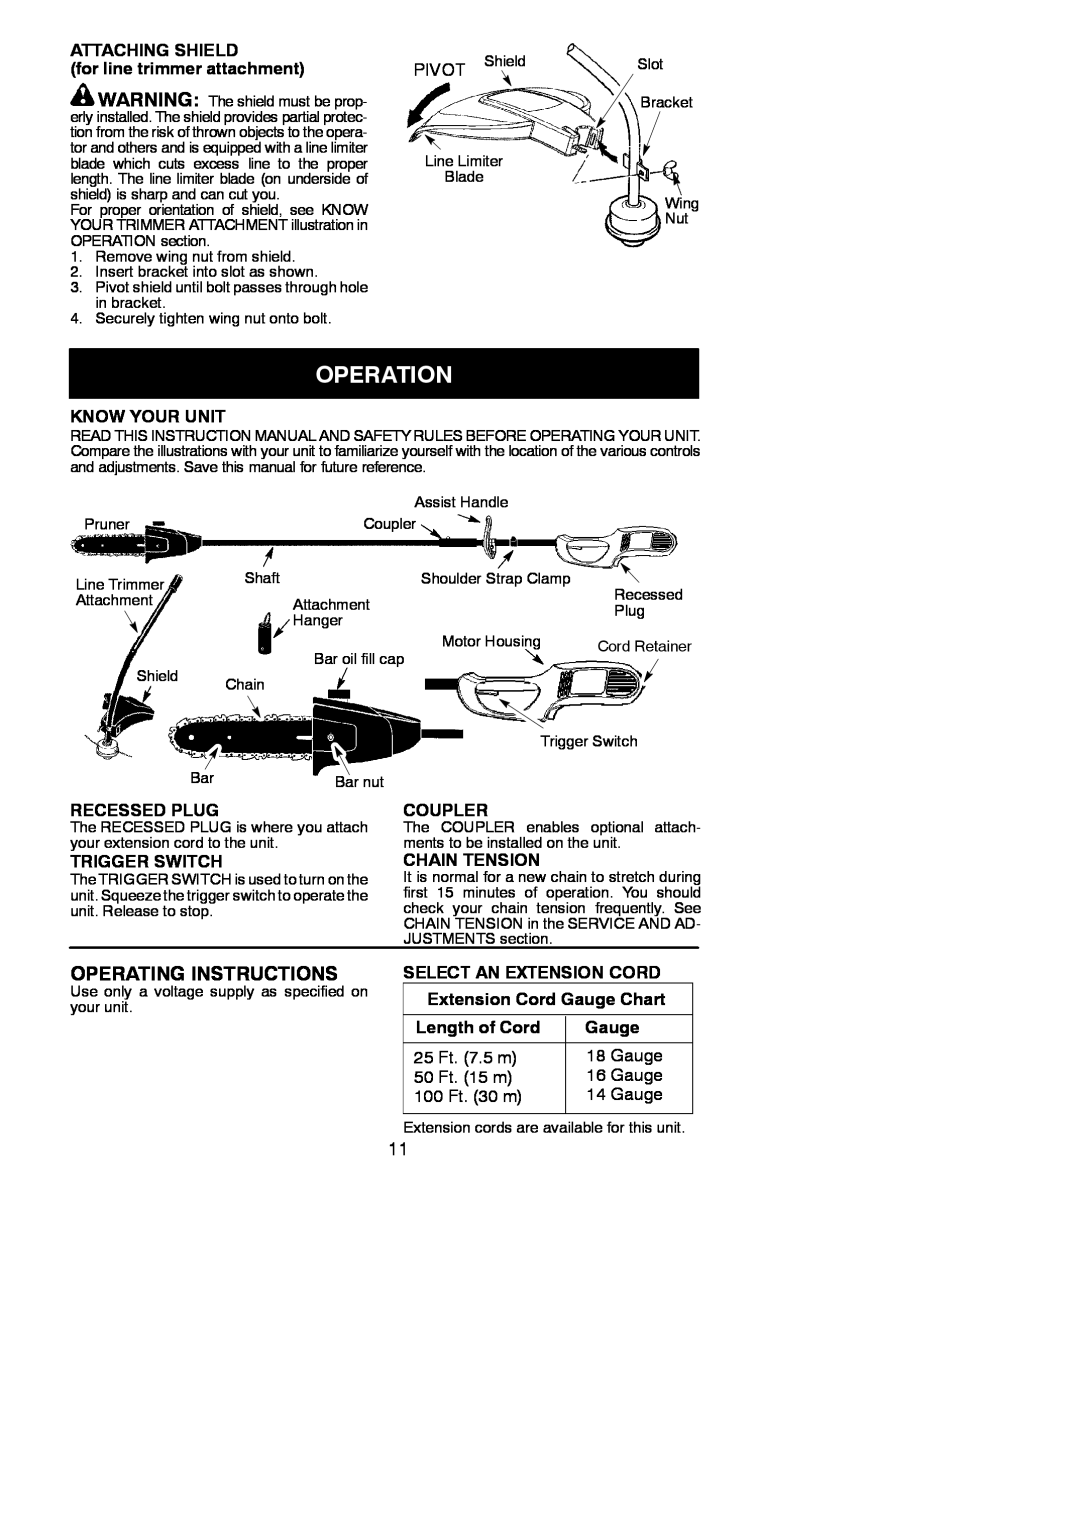 Poulan 810 EPT Operation, Operating Instructions, ATTACHING SHIELD for line trimmer attachment, PIVOT Shield, Coupler 